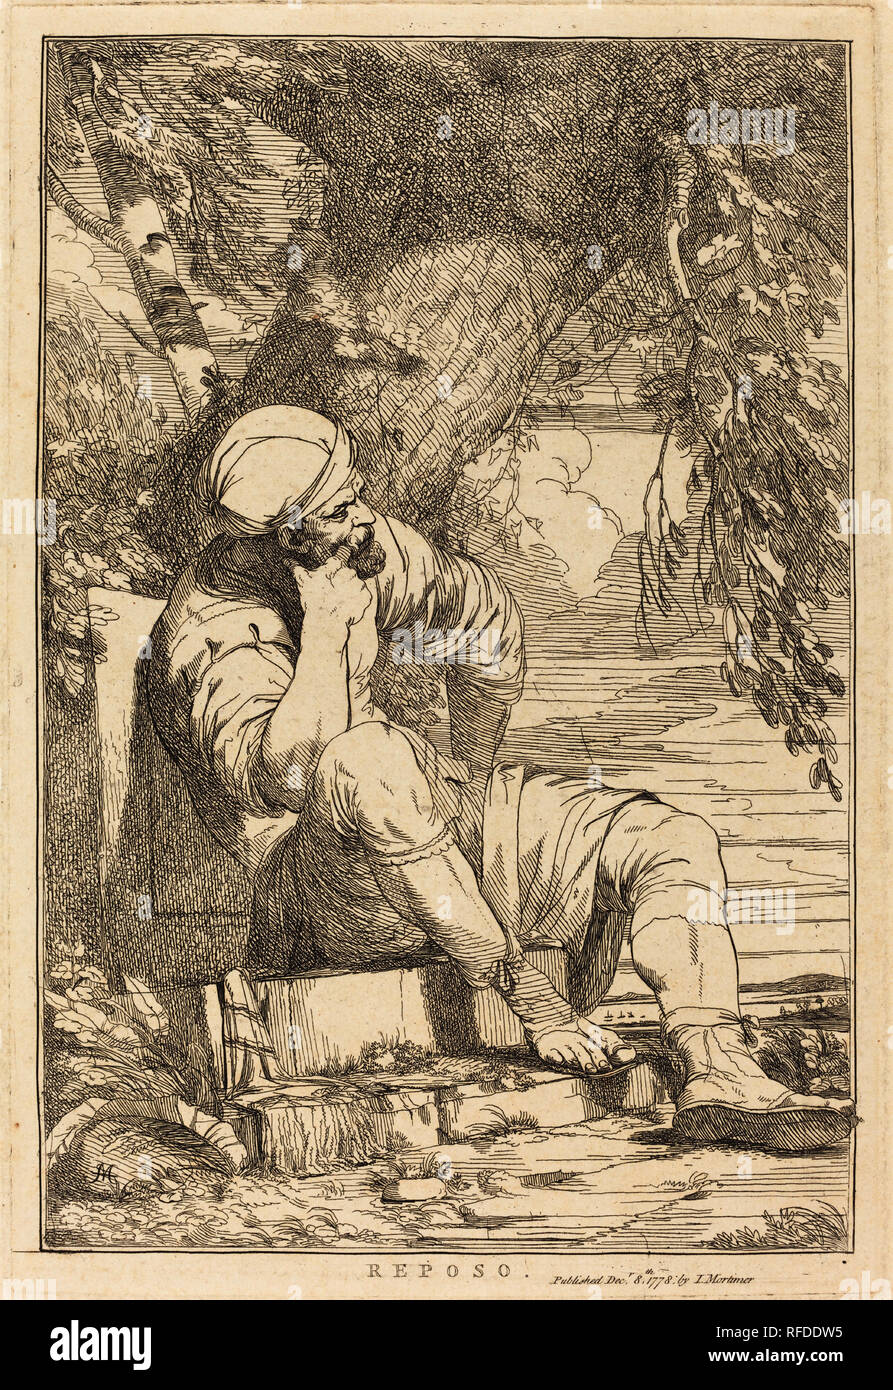 Reposo. Dated: 1778. Dimensions: plate: 30 × 20.2 cm (11 13/16 × 7 15/16 in.)  sheet: 42 × 29 cm (16 9/16 × 11 7/16 in.). Medium: etching. Museum: National Gallery of Art, Washington DC. Author: John Hamilton Mortimer. Stock Photo